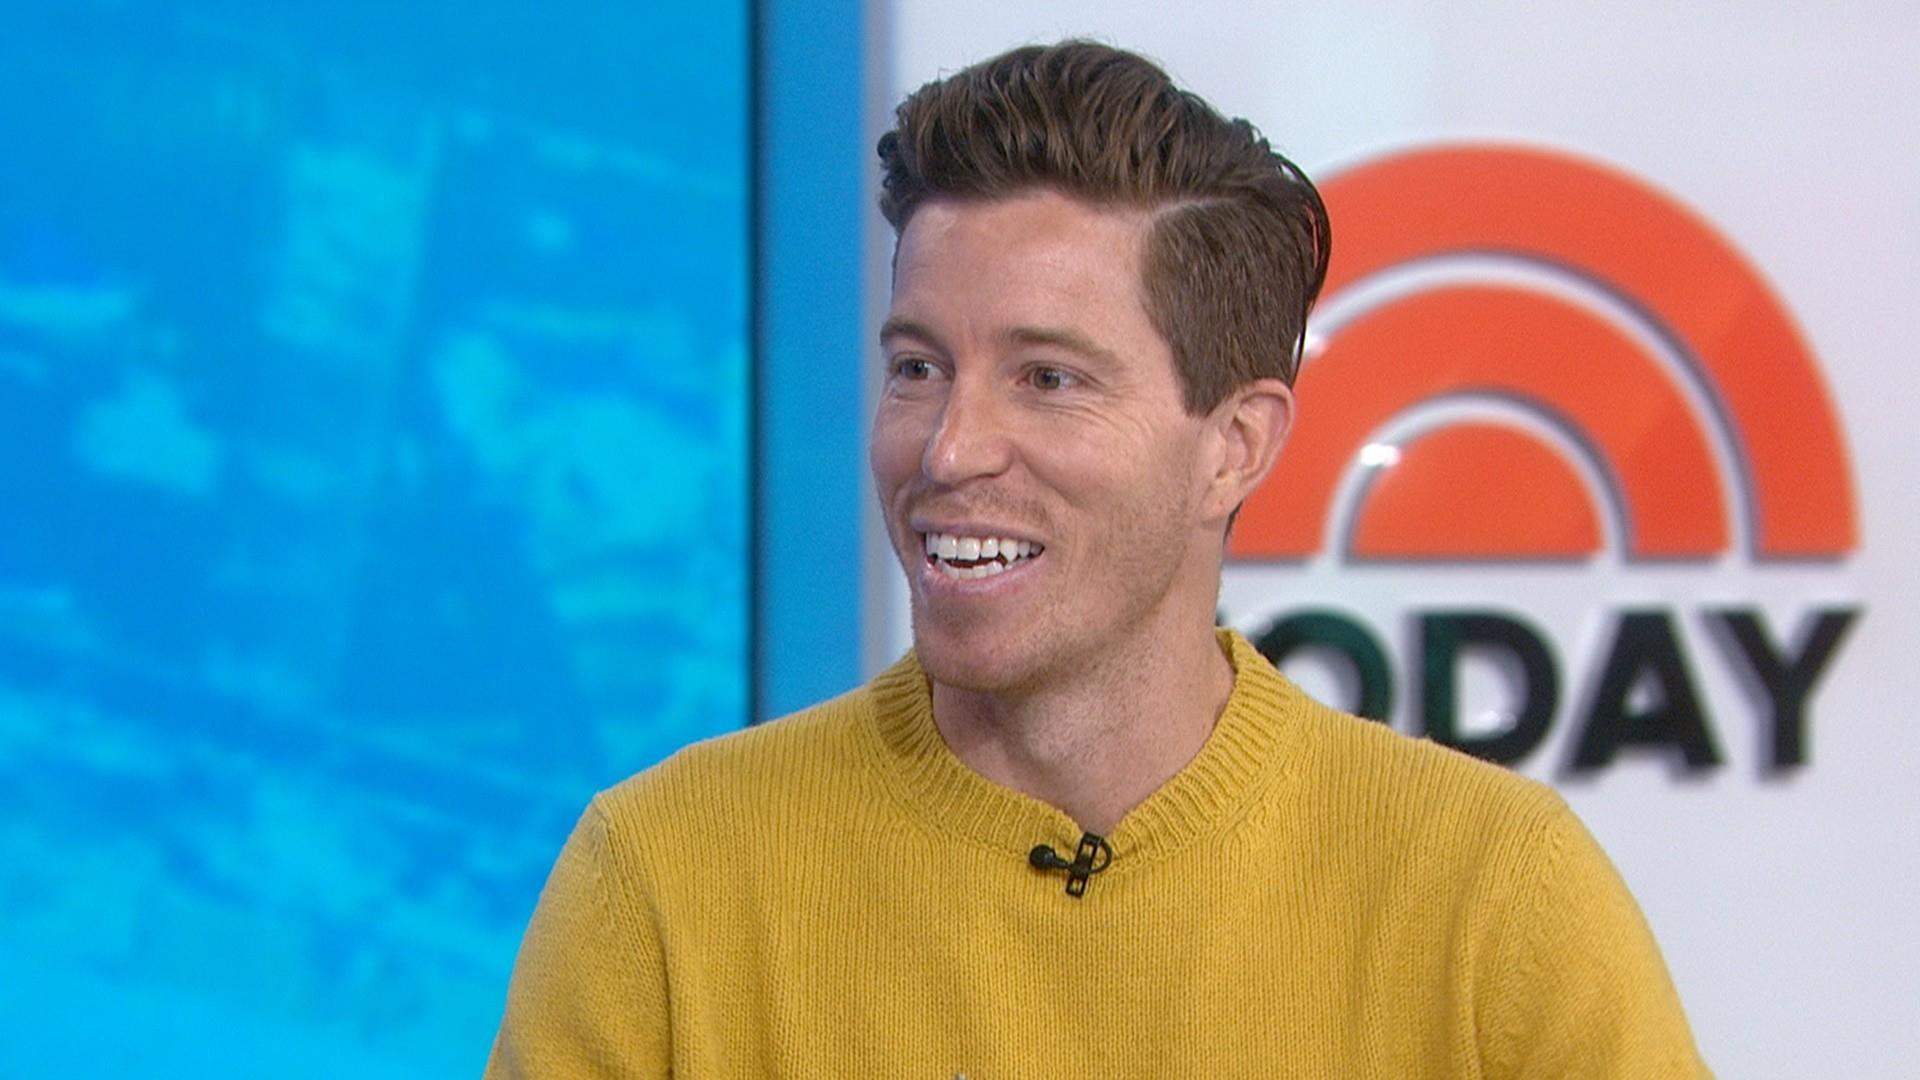 Shaun White Now Has A New Hair Color